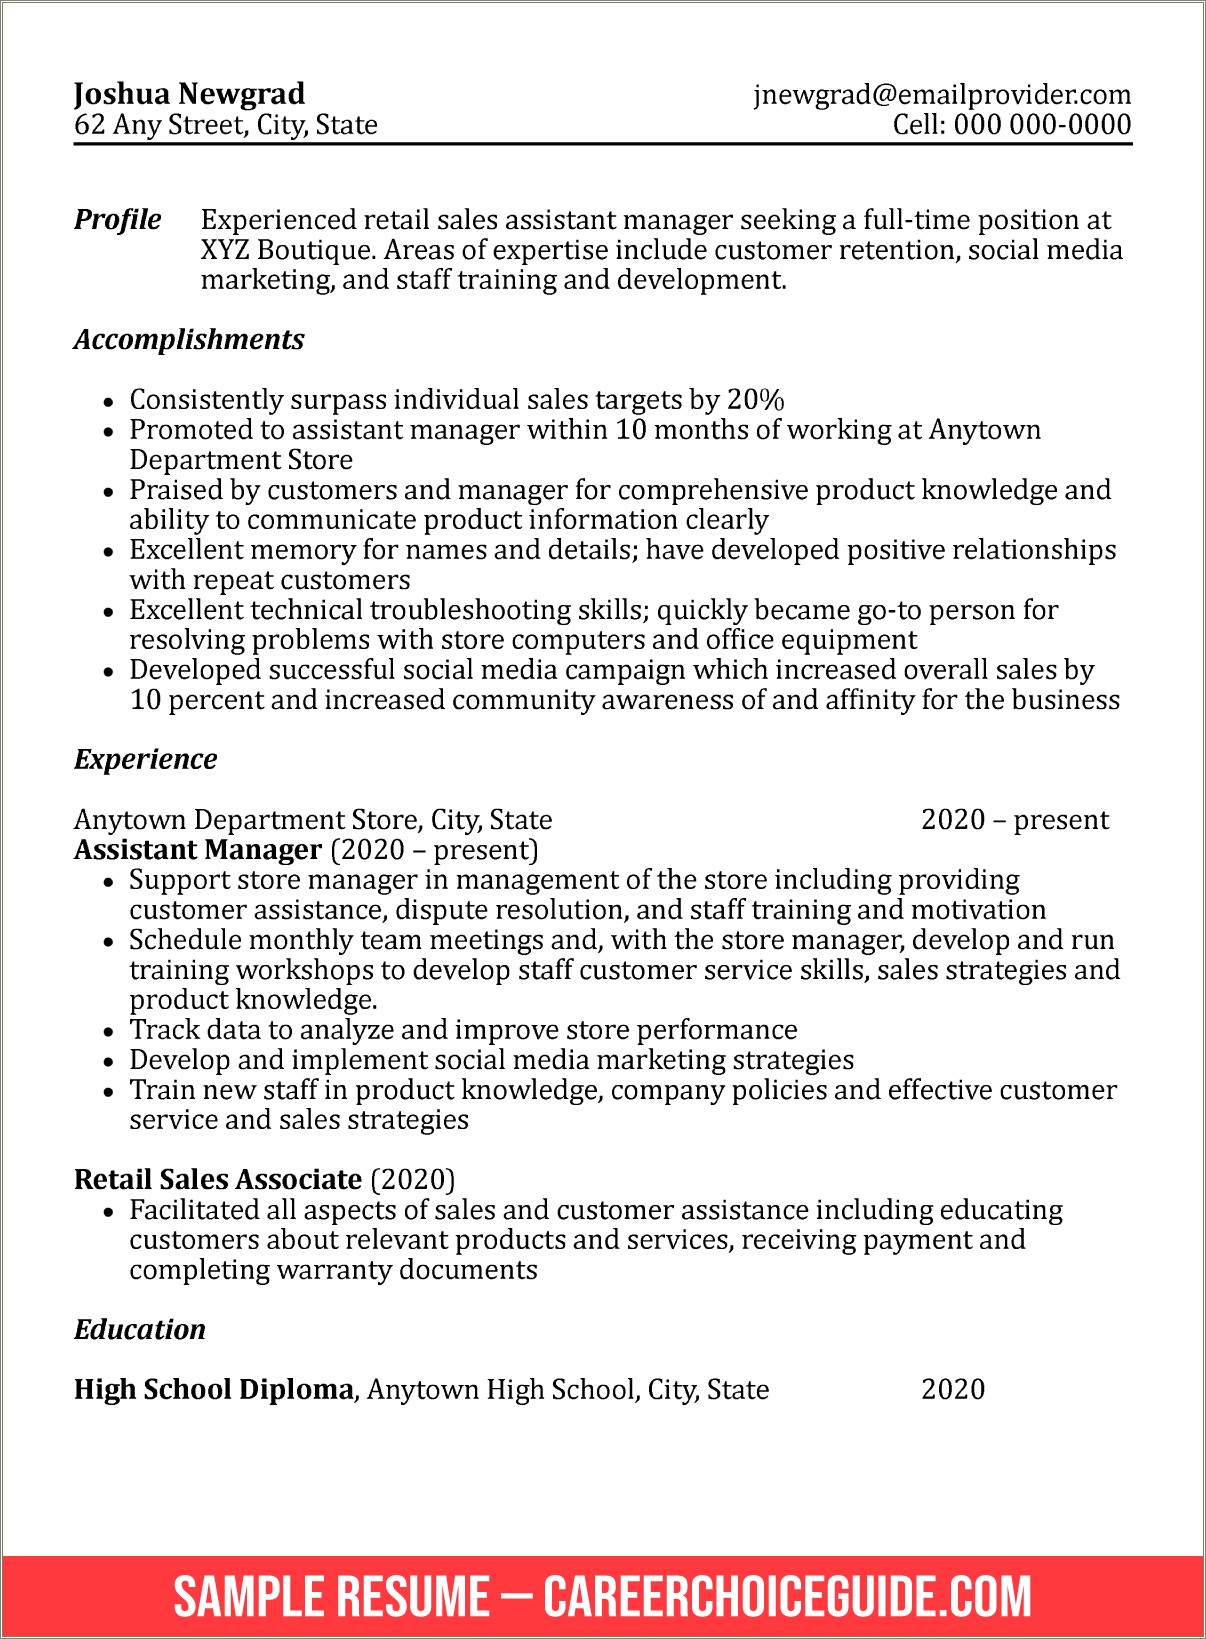 Education Section Of A Graduate School Resume